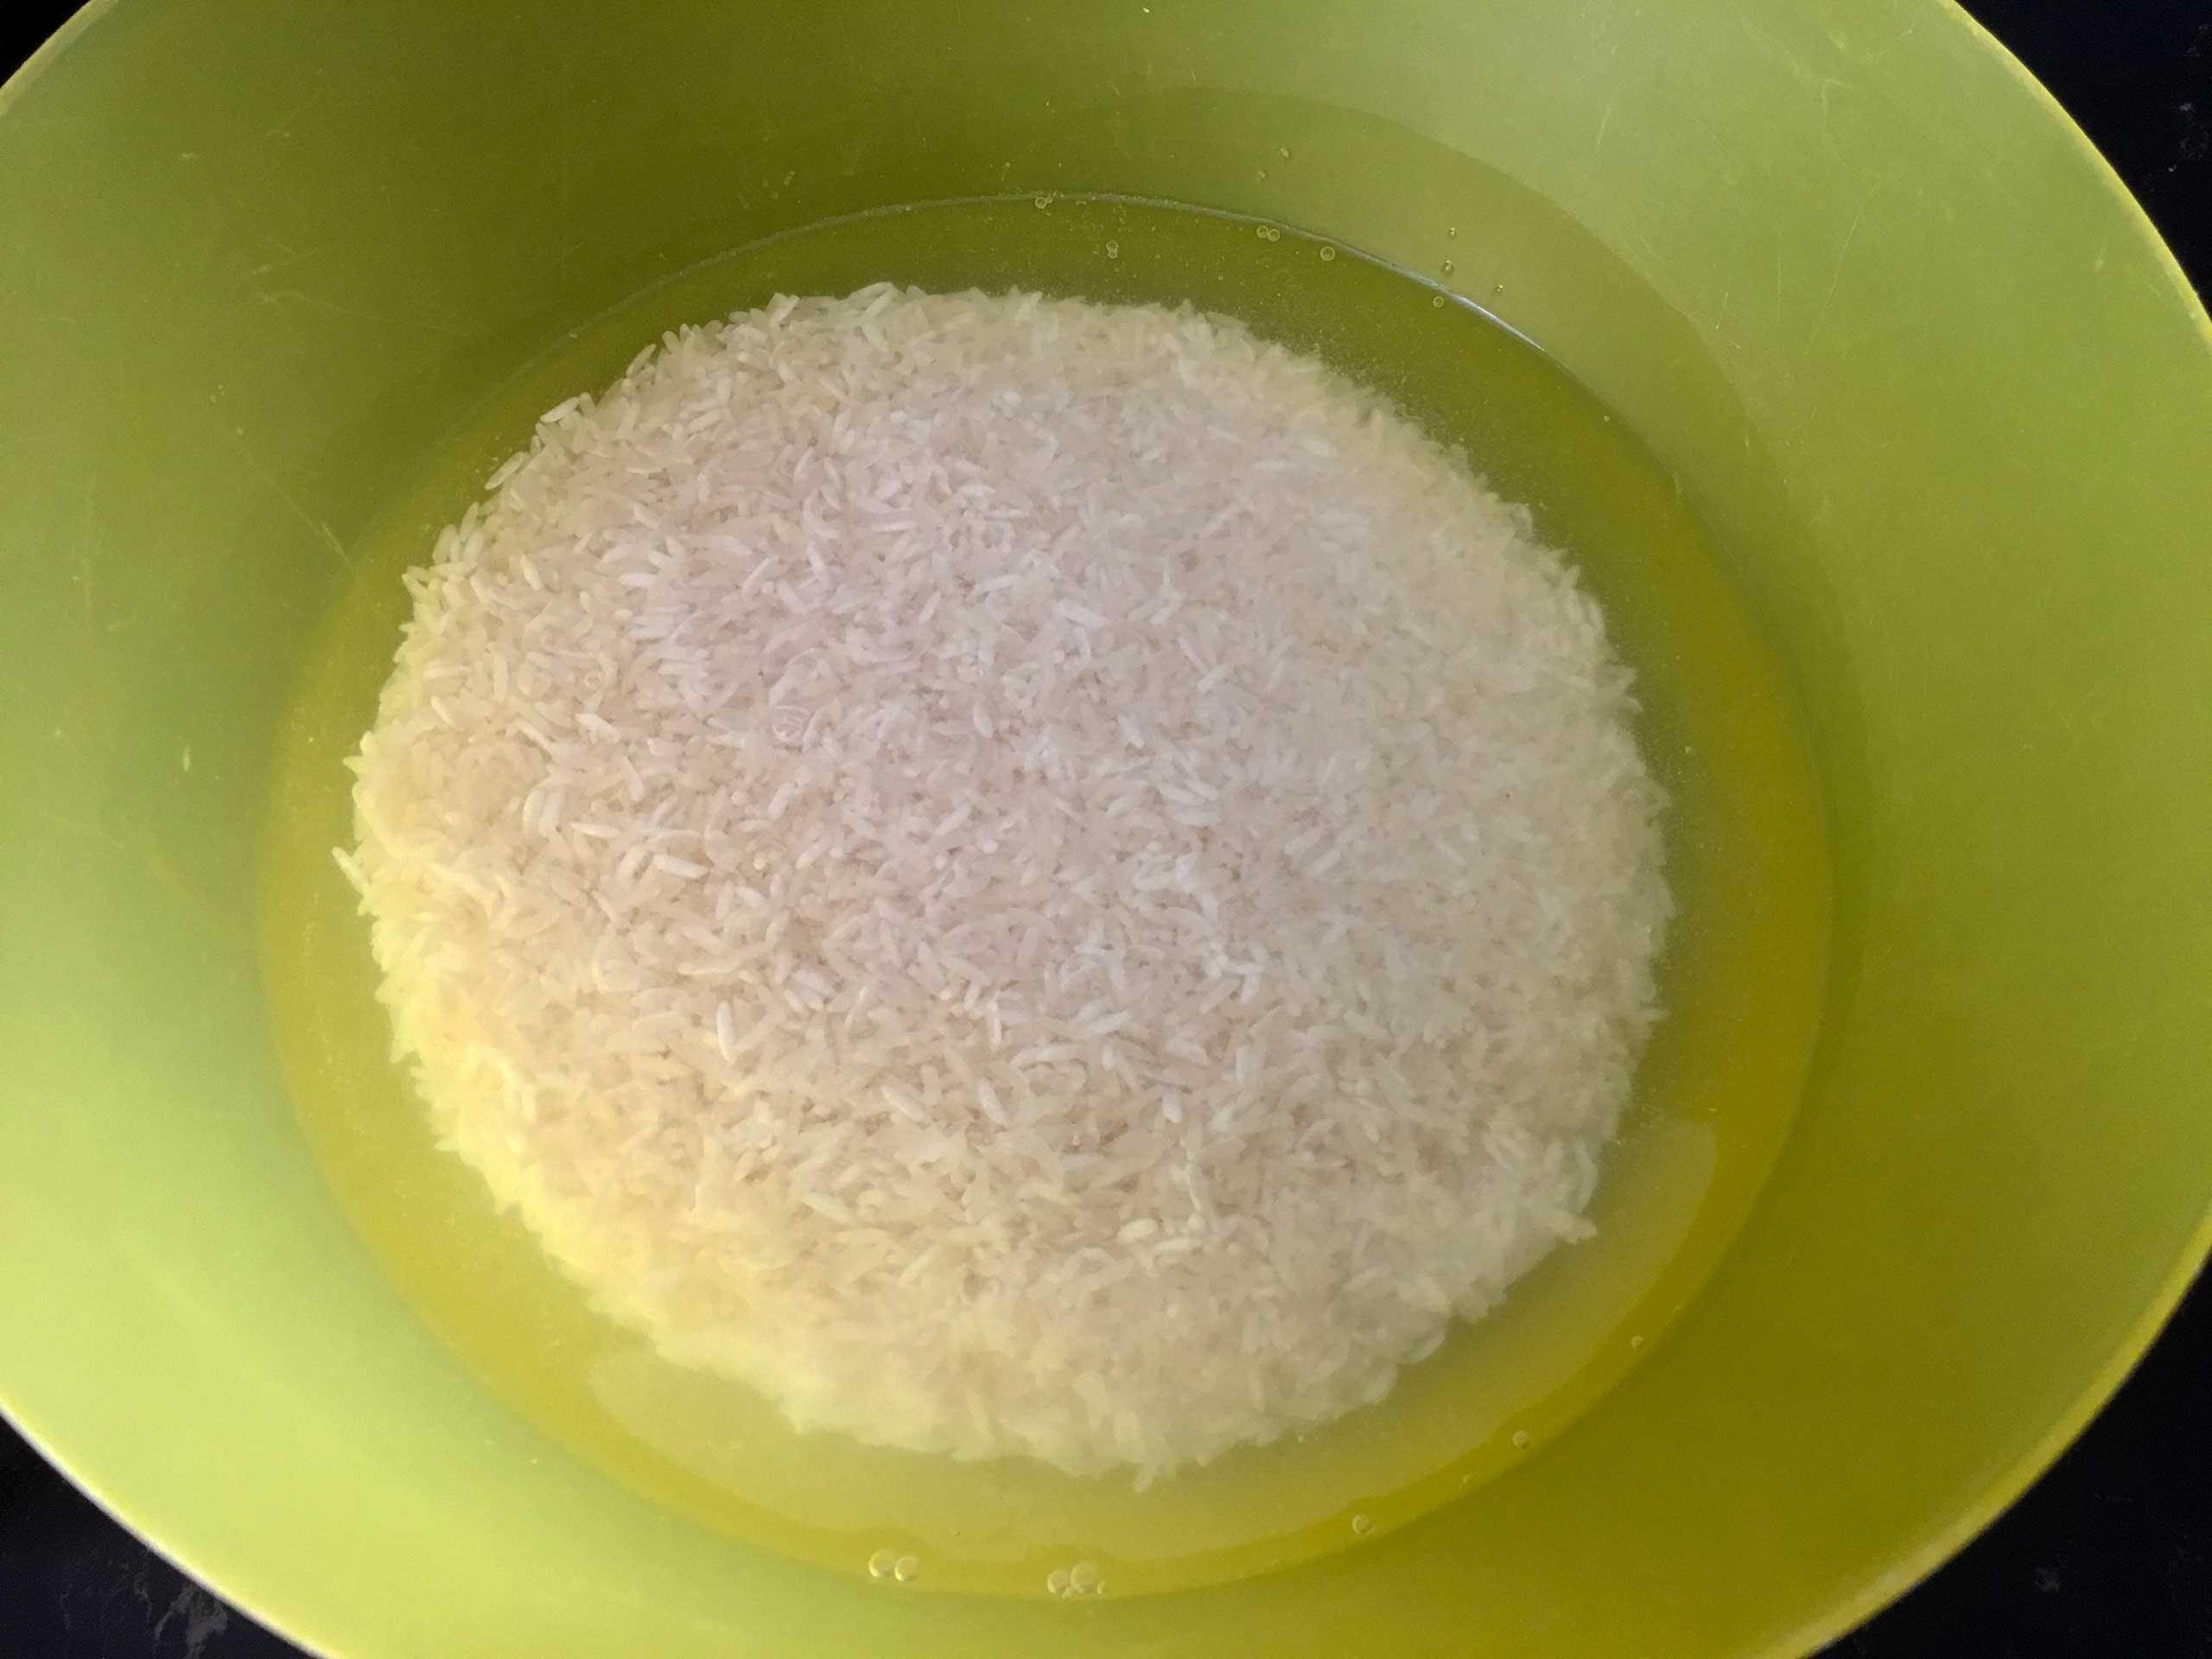 Place the rice in a bowl and cover with fresh water